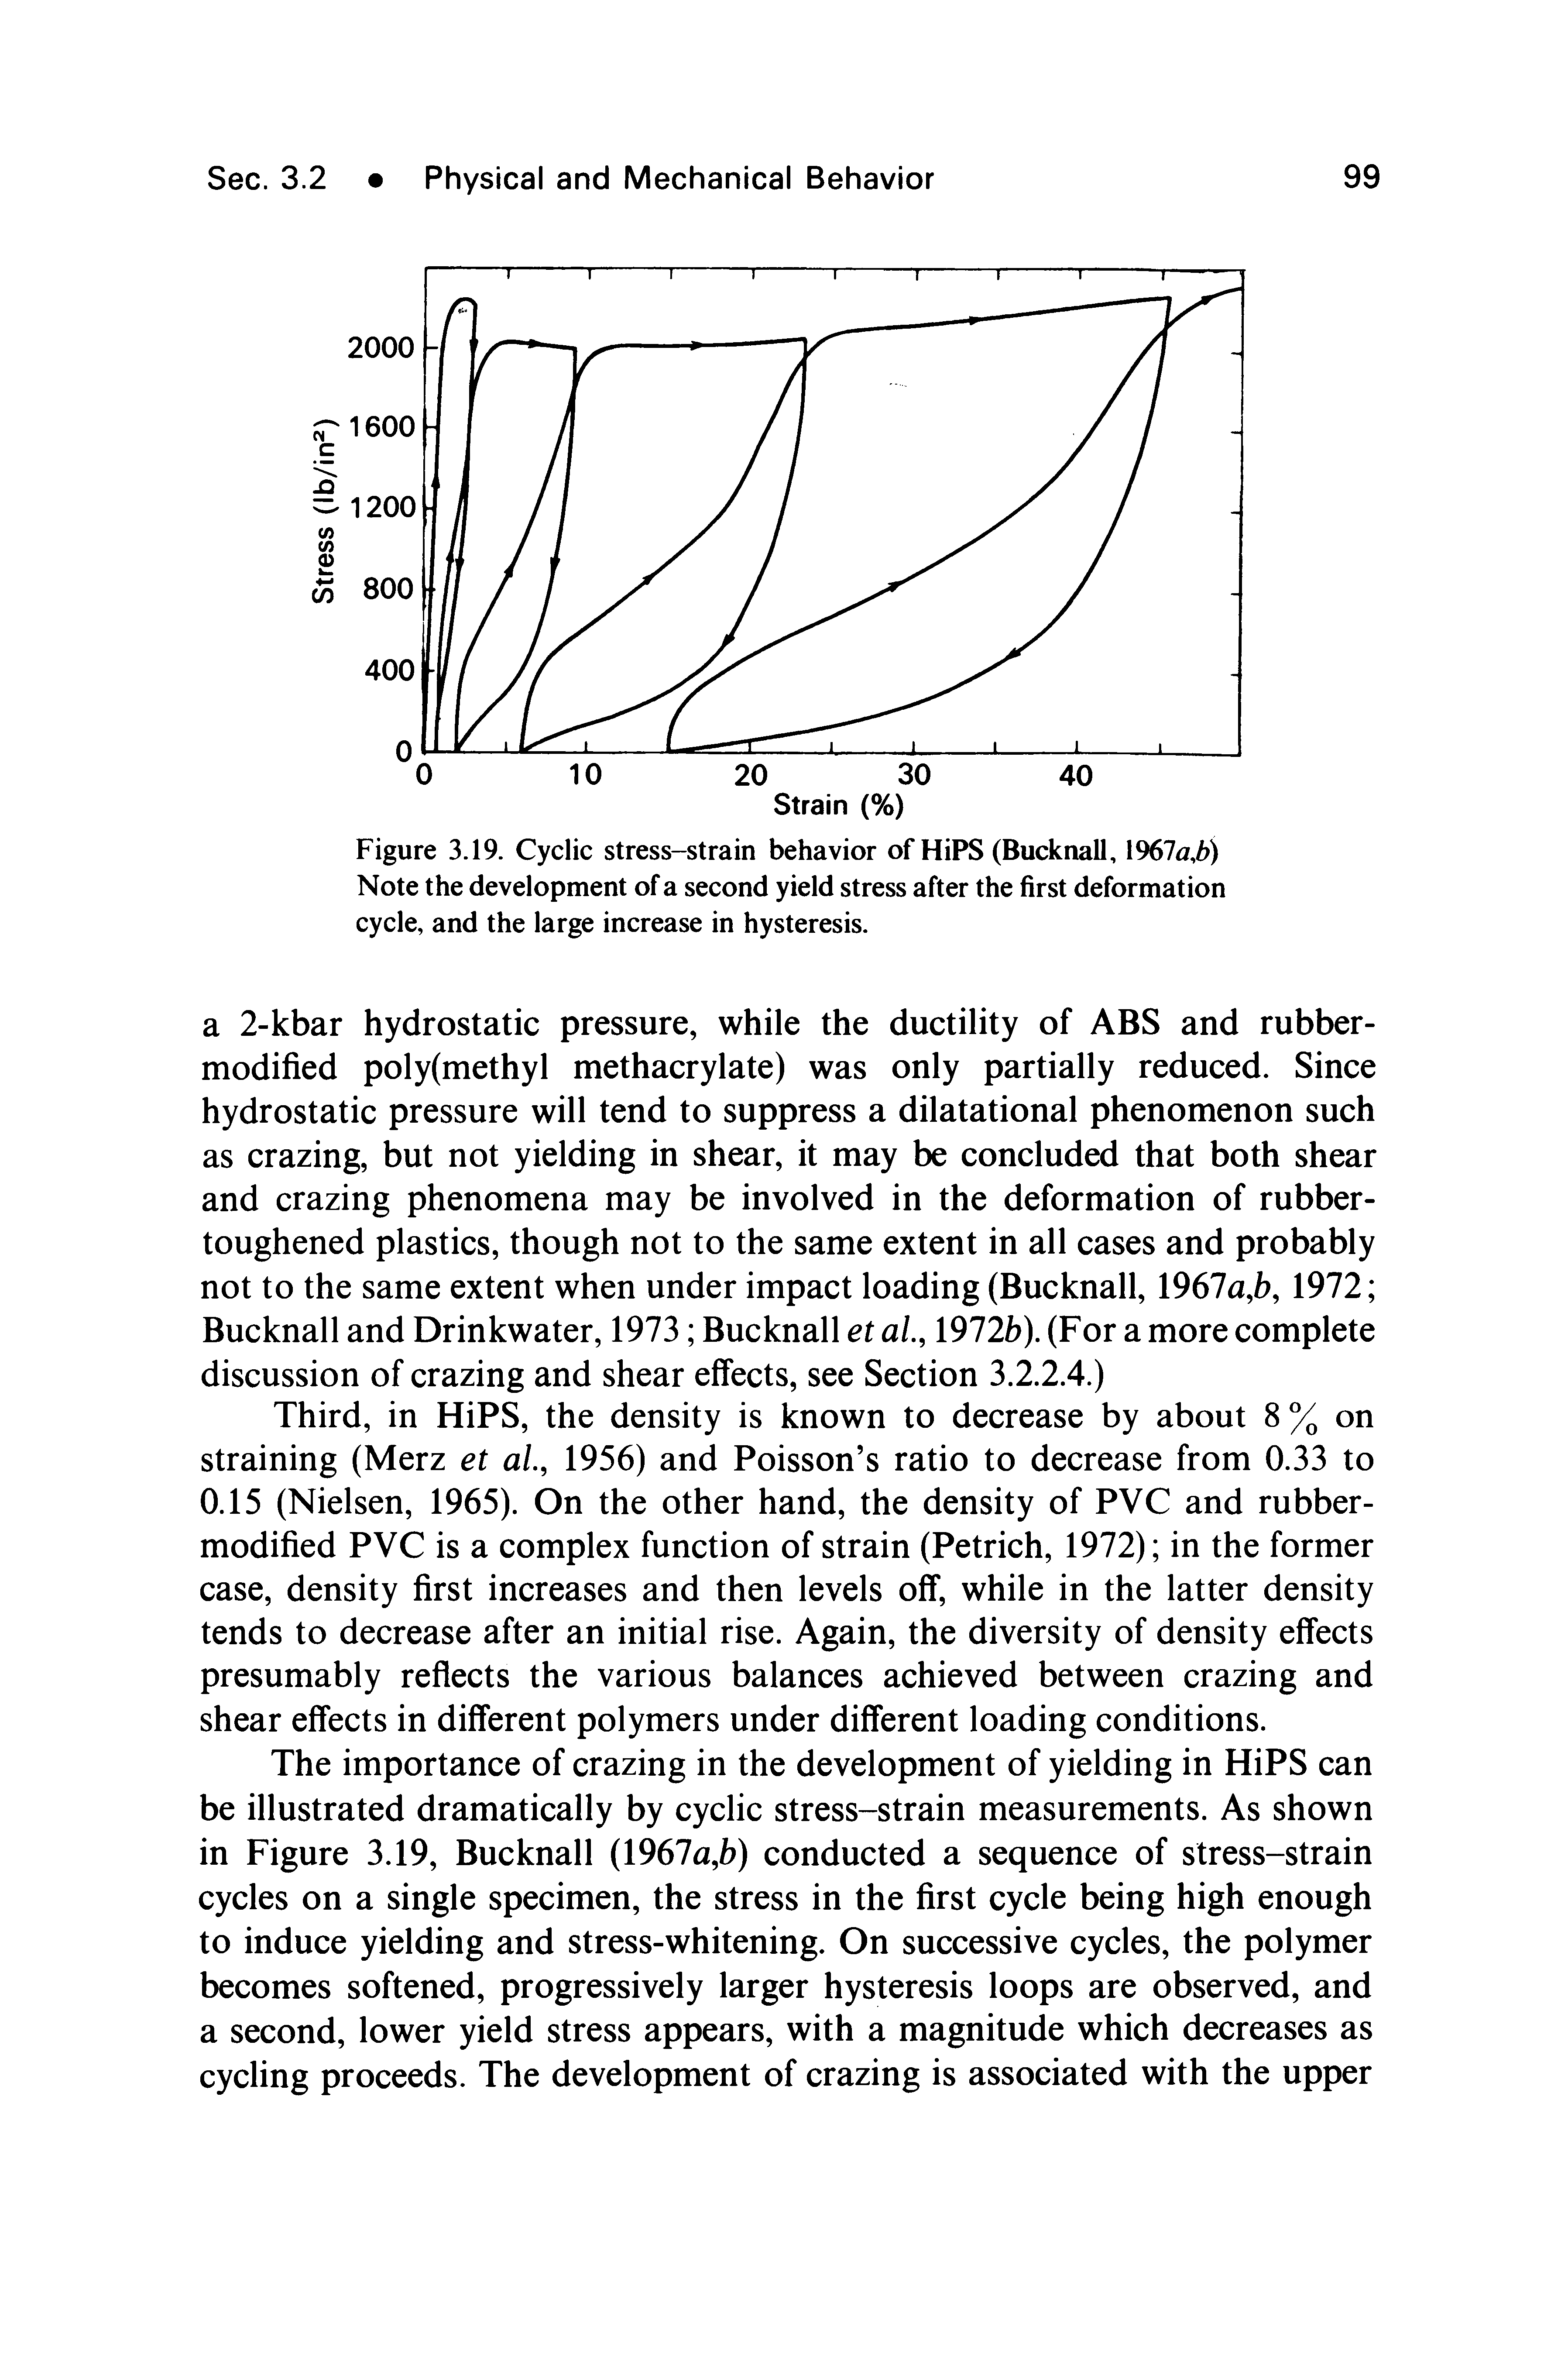 Figure 3.19. Cyclic stress-strain behavior of HiPS (Bucknall, 1967 ) Note the development of a second yield stress after the first deformation cycle, and the large increase in hysteresis.